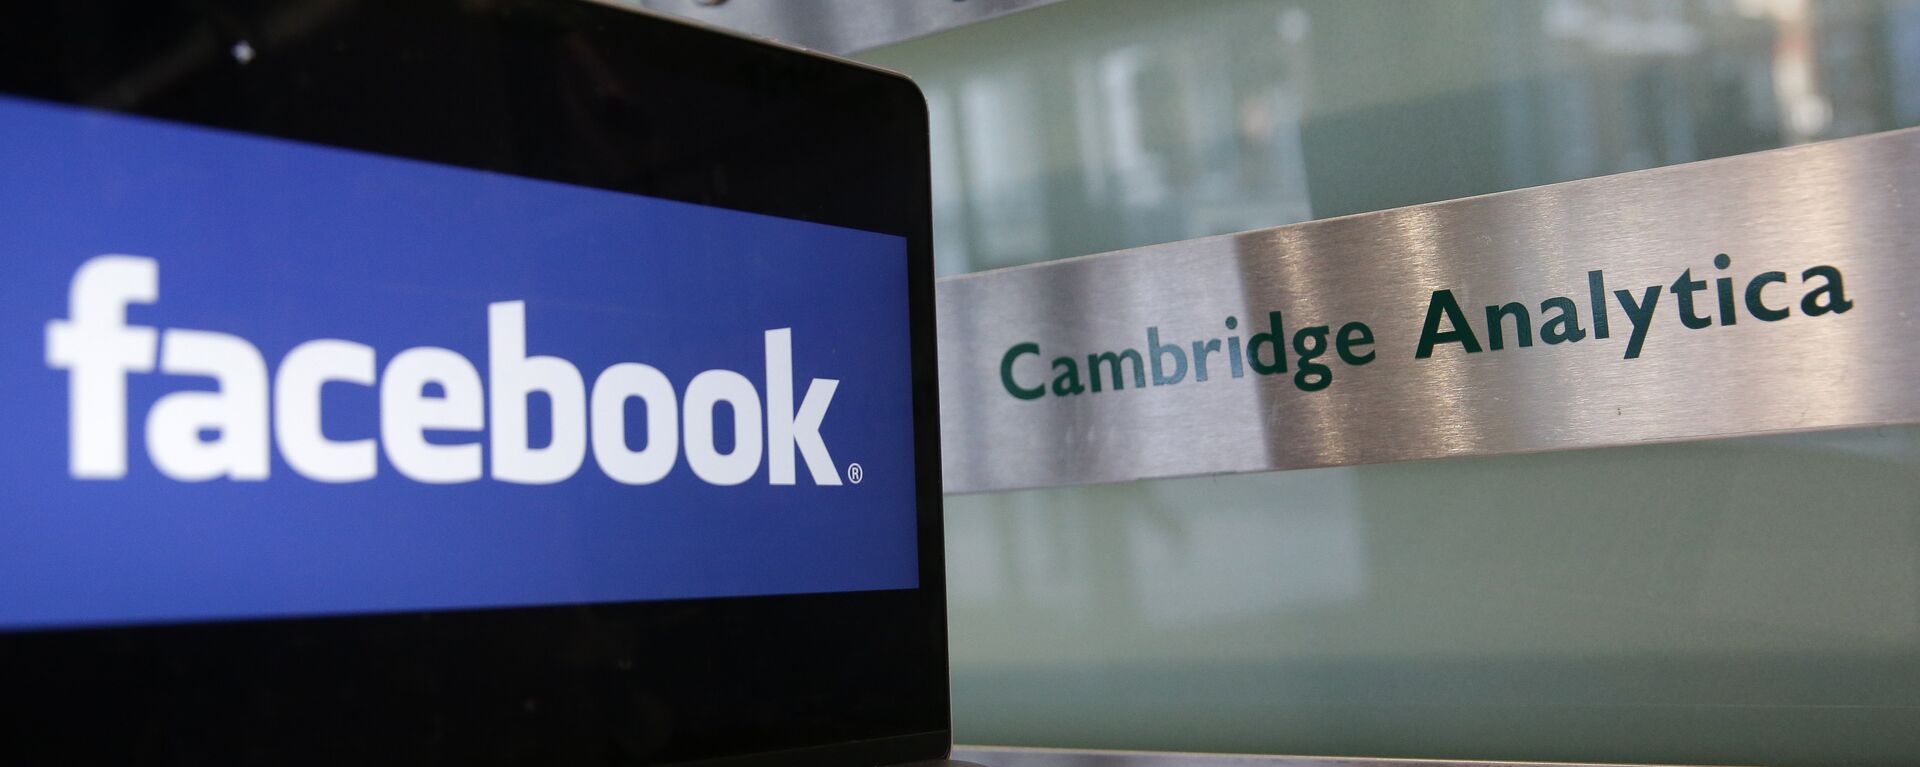 A laptop showing the Facebook logo is held alongside a Cambridge Analytica sign at the entrance to the building housing the offices of Cambridge Analytica, in central London on March 21, 2018 - Sputnik Afrique, 1920, 16.05.2018